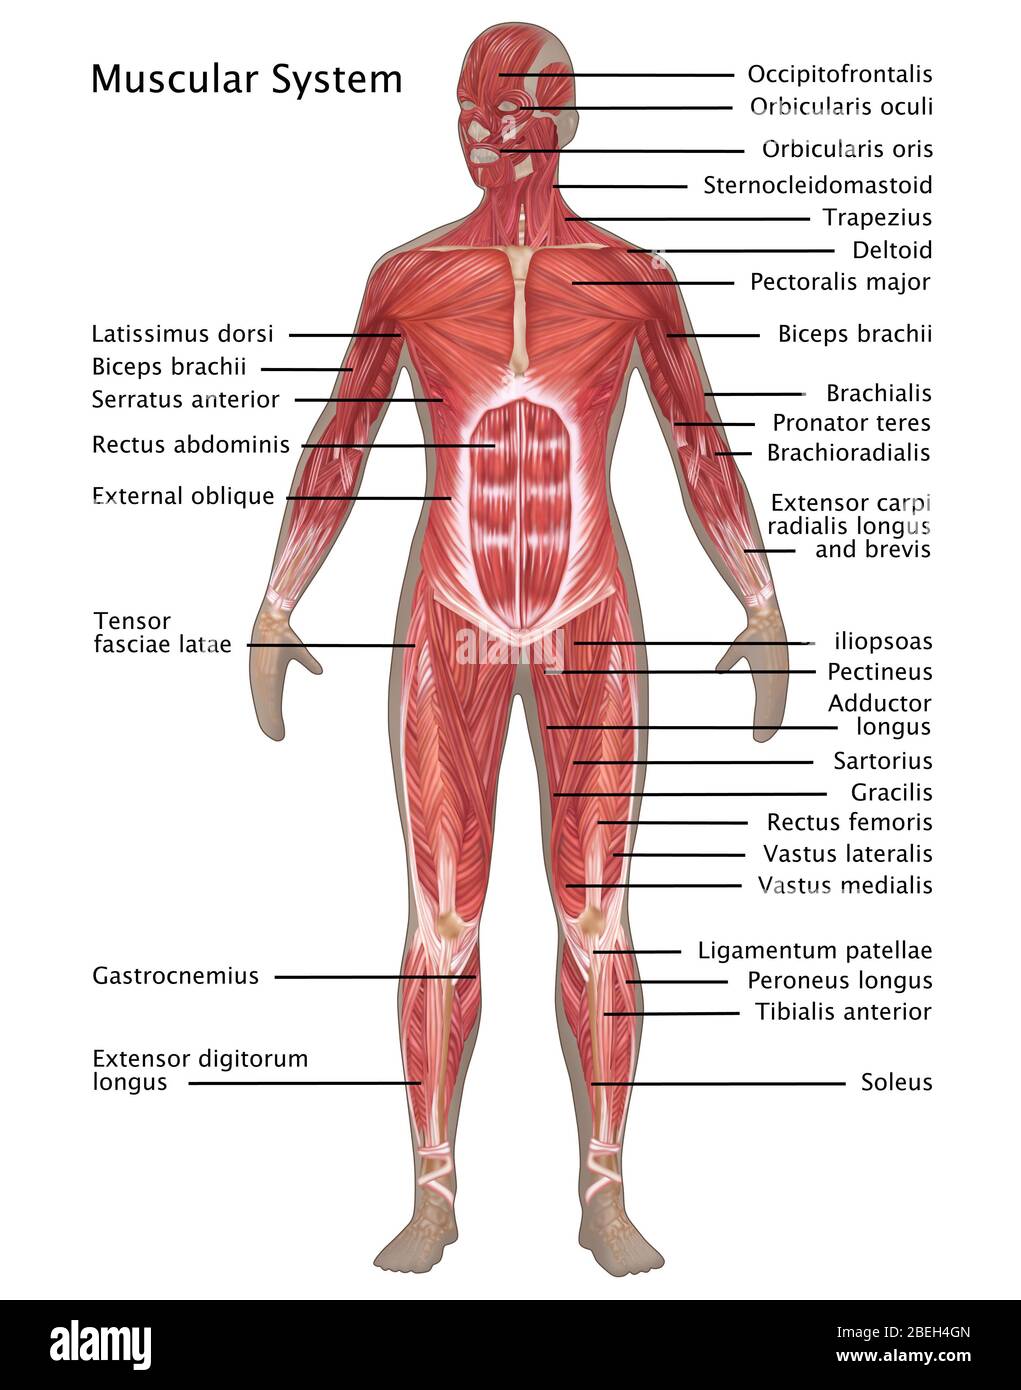 Muscular System in Female Anatomy Stock Photo